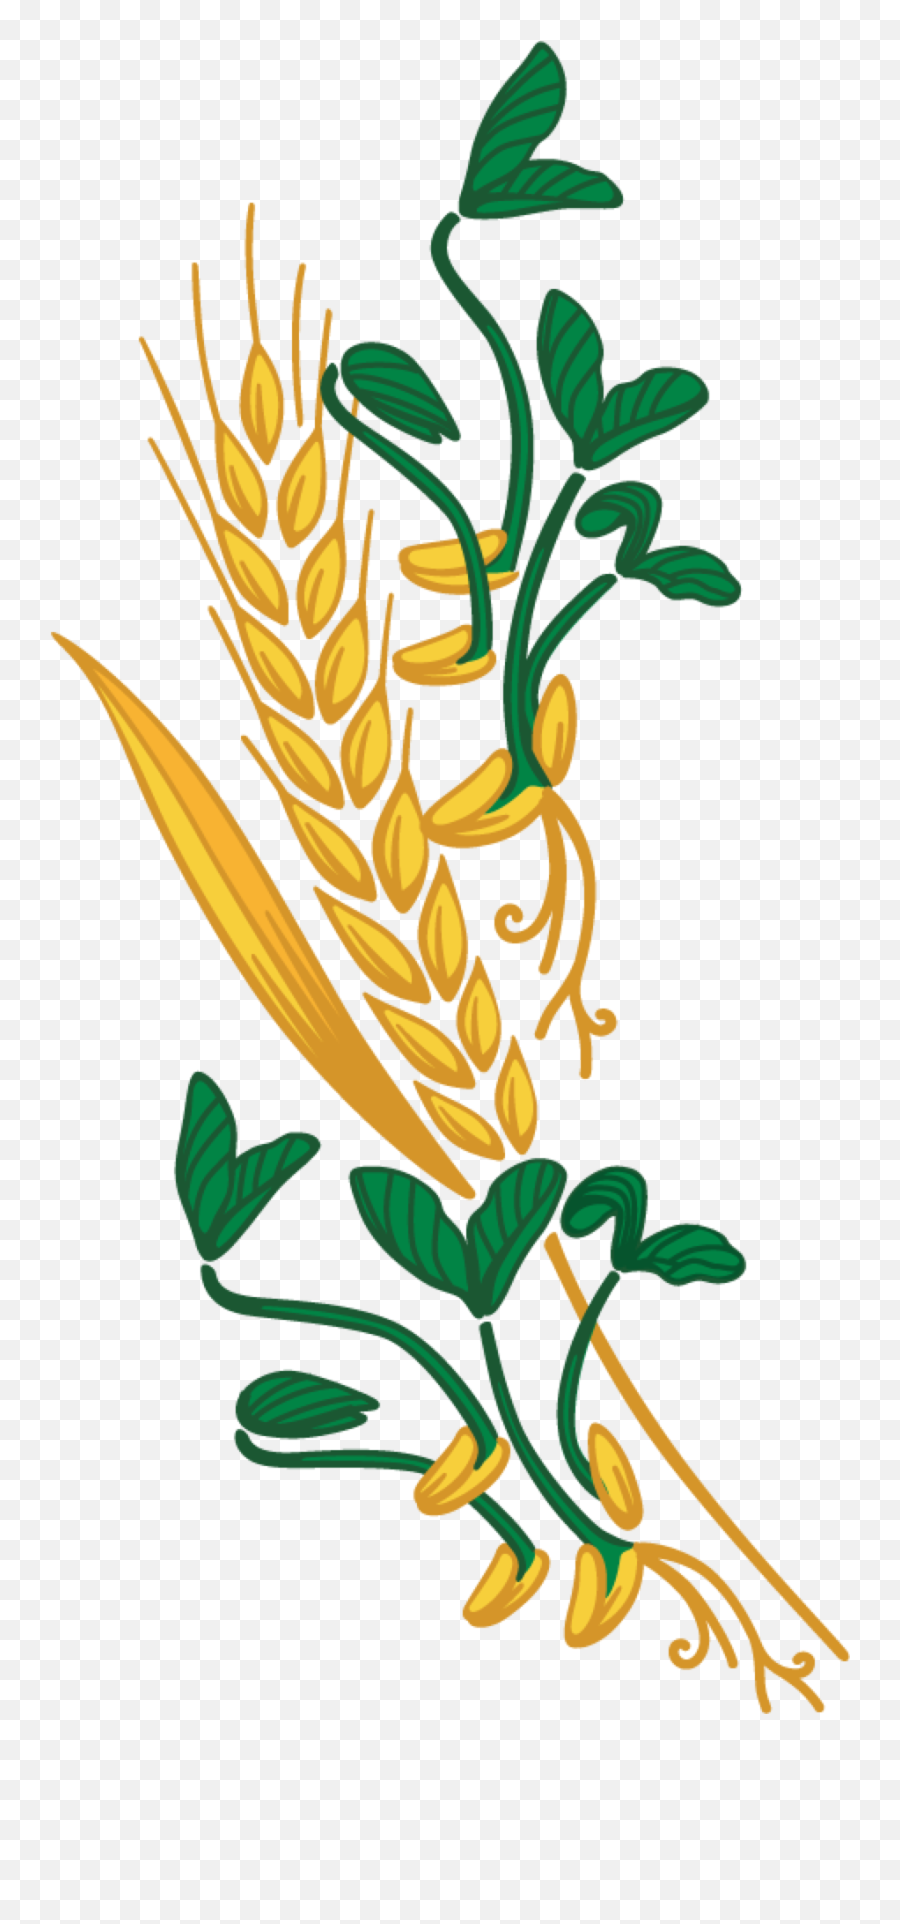 Download Wheat Clipart Png Download - Whole Grain Full Wheat Emoji,Wheat Clipart